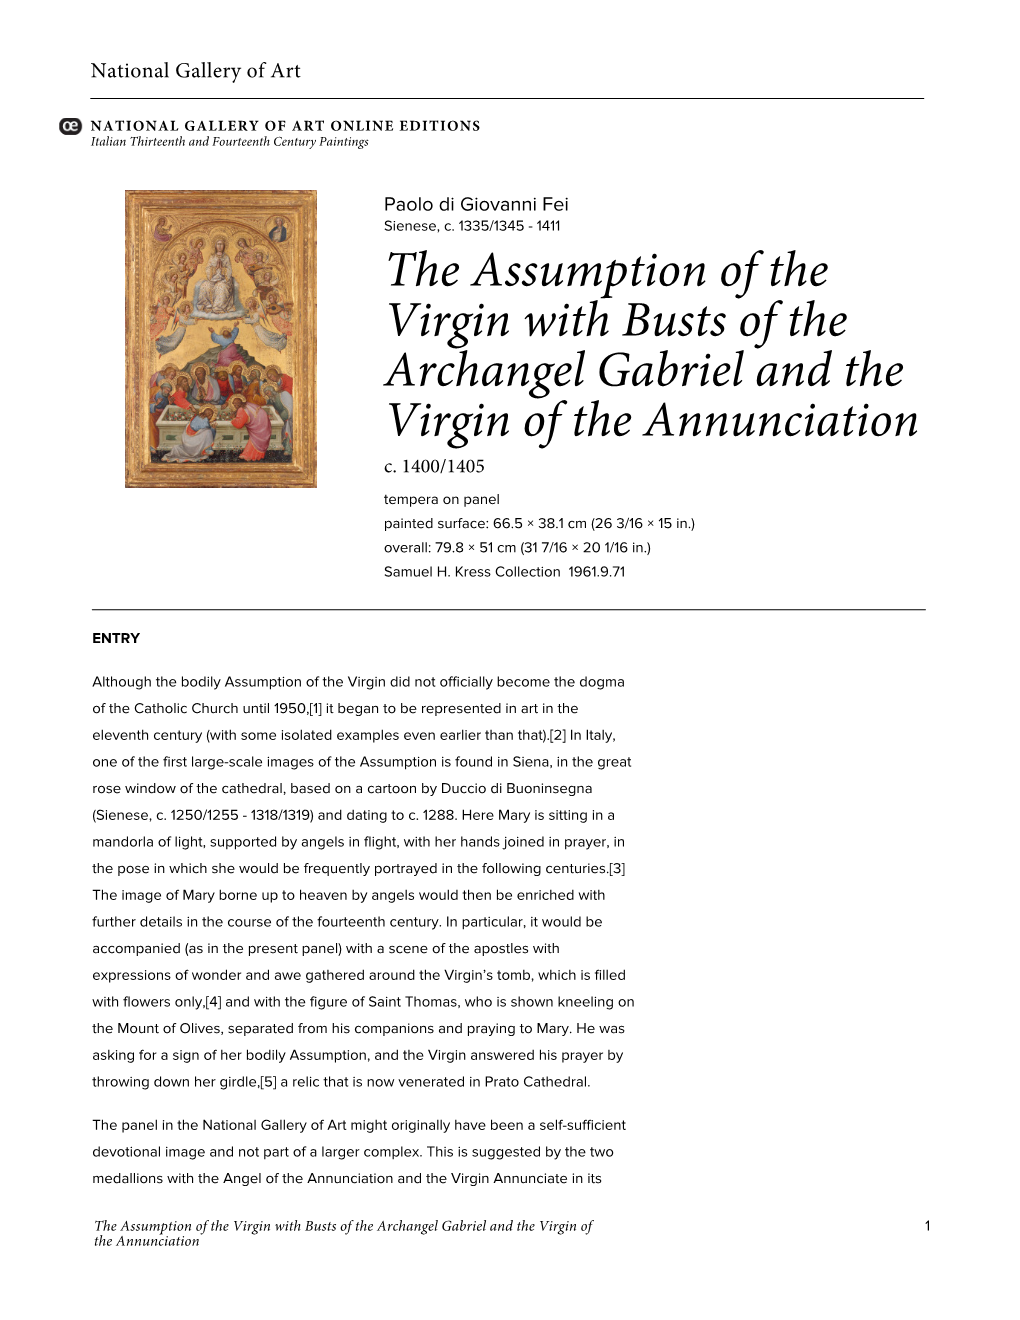 The Assumption of the Virgin with Busts of the Archangel Gabriel and the Virgin of the Annunciation C